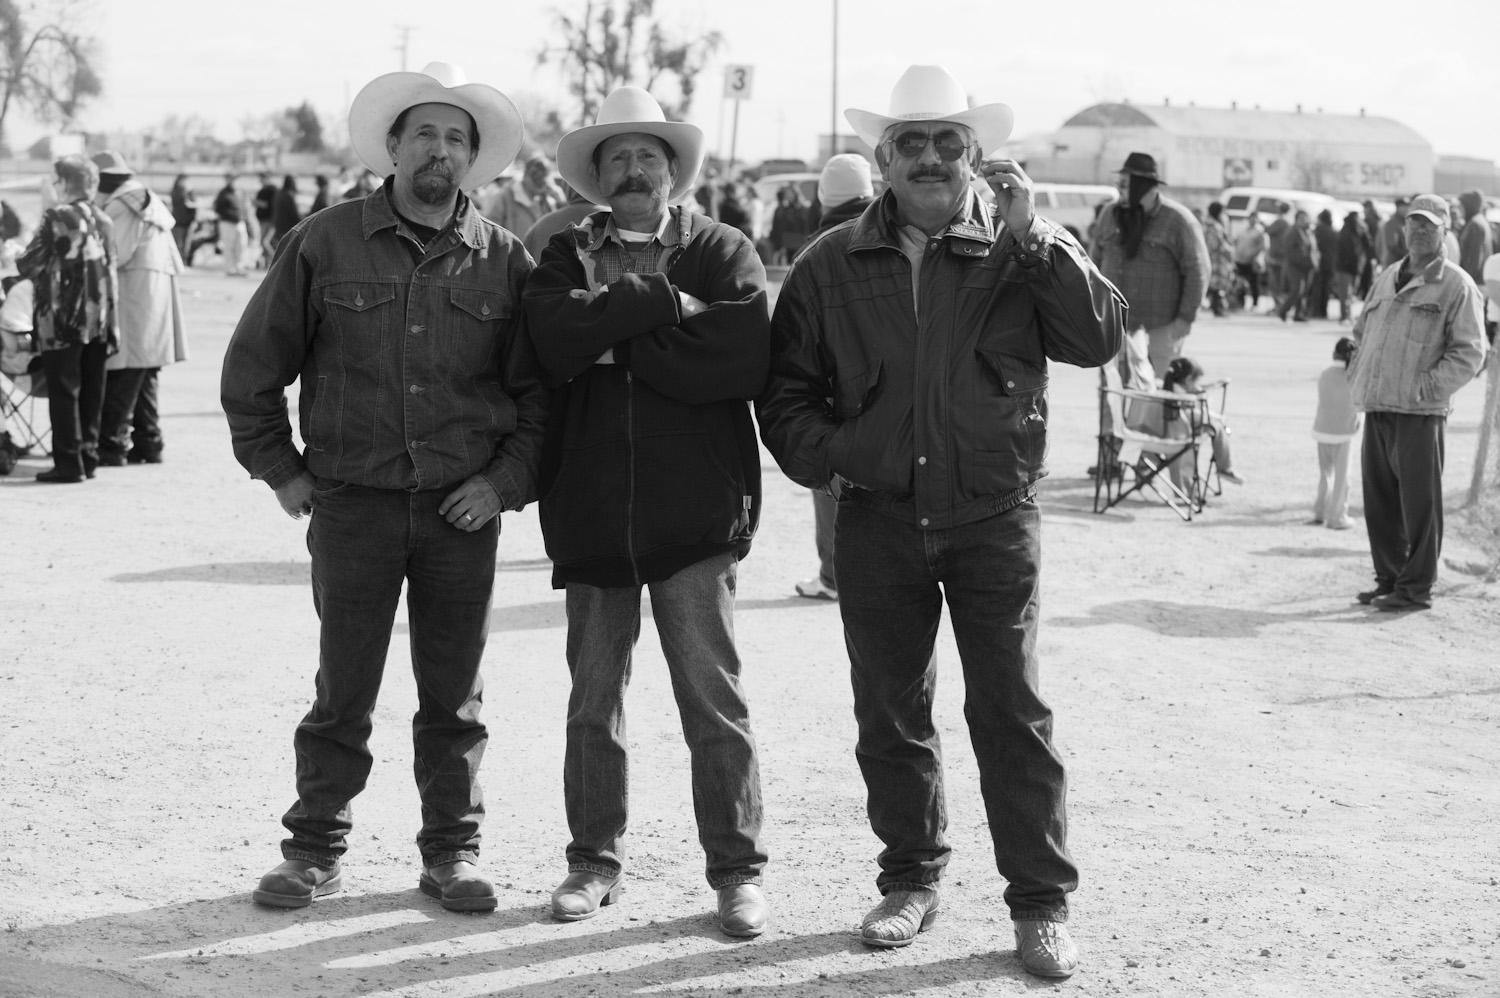  Humberto, center, has worked in many Central Valley farms for over 3 decades. 